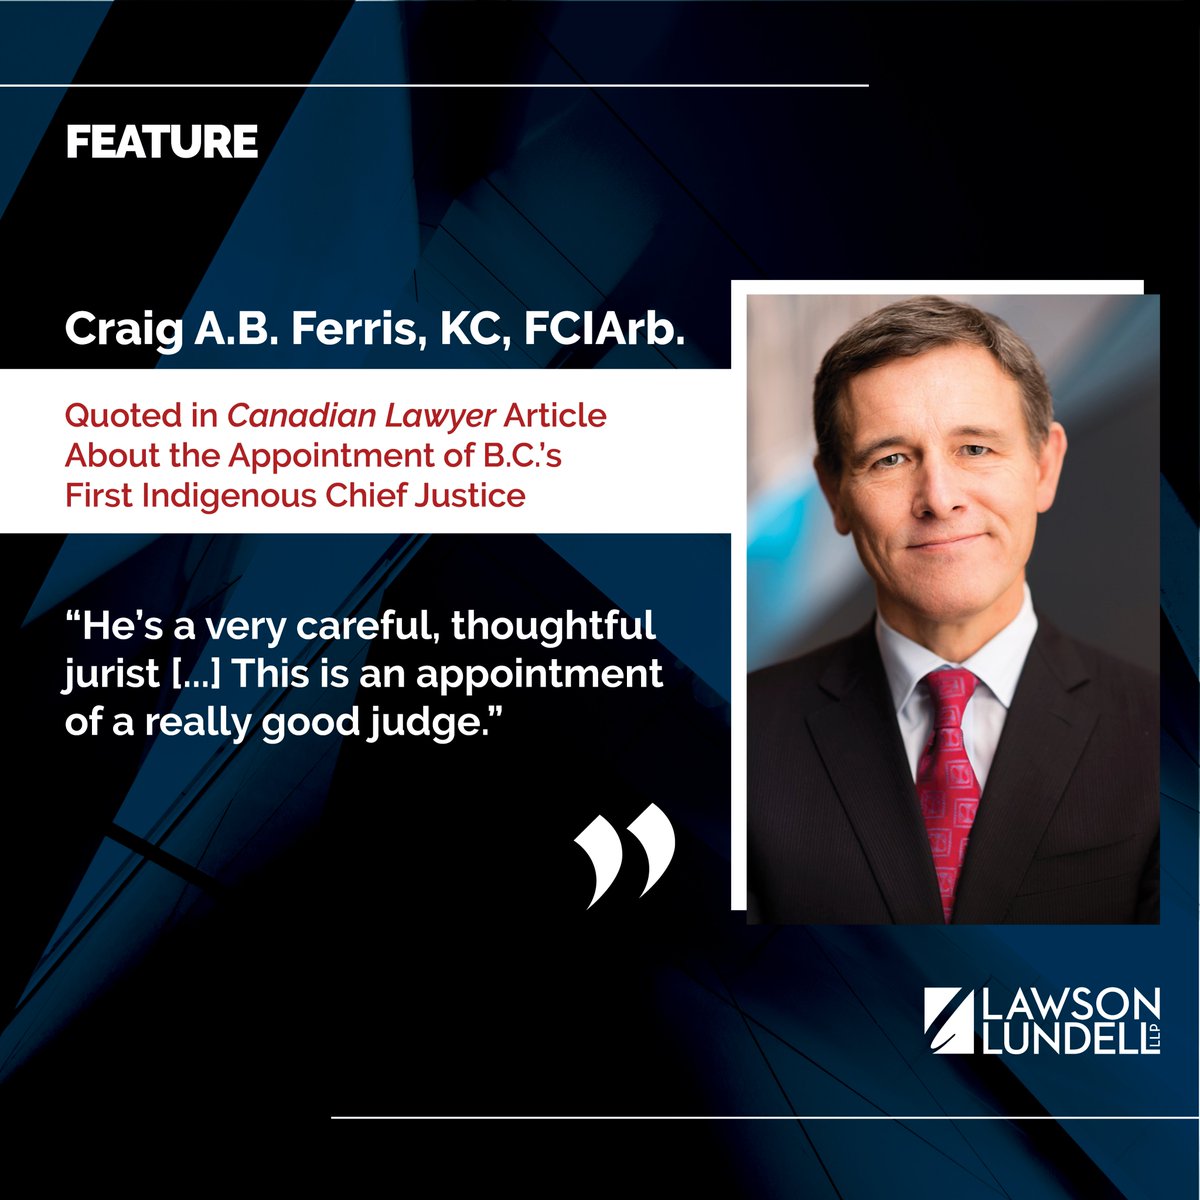 Lawson Lundell lawyer Craig Ferris, KC, FCIArb., was quoted in an article by @CanLawMag titled 'Justice Leonard Marchand appointed as British Columbia’s first Indigenous Chief Justice.' Read the full article here: lawsonlundell.com/newsroom-news-…